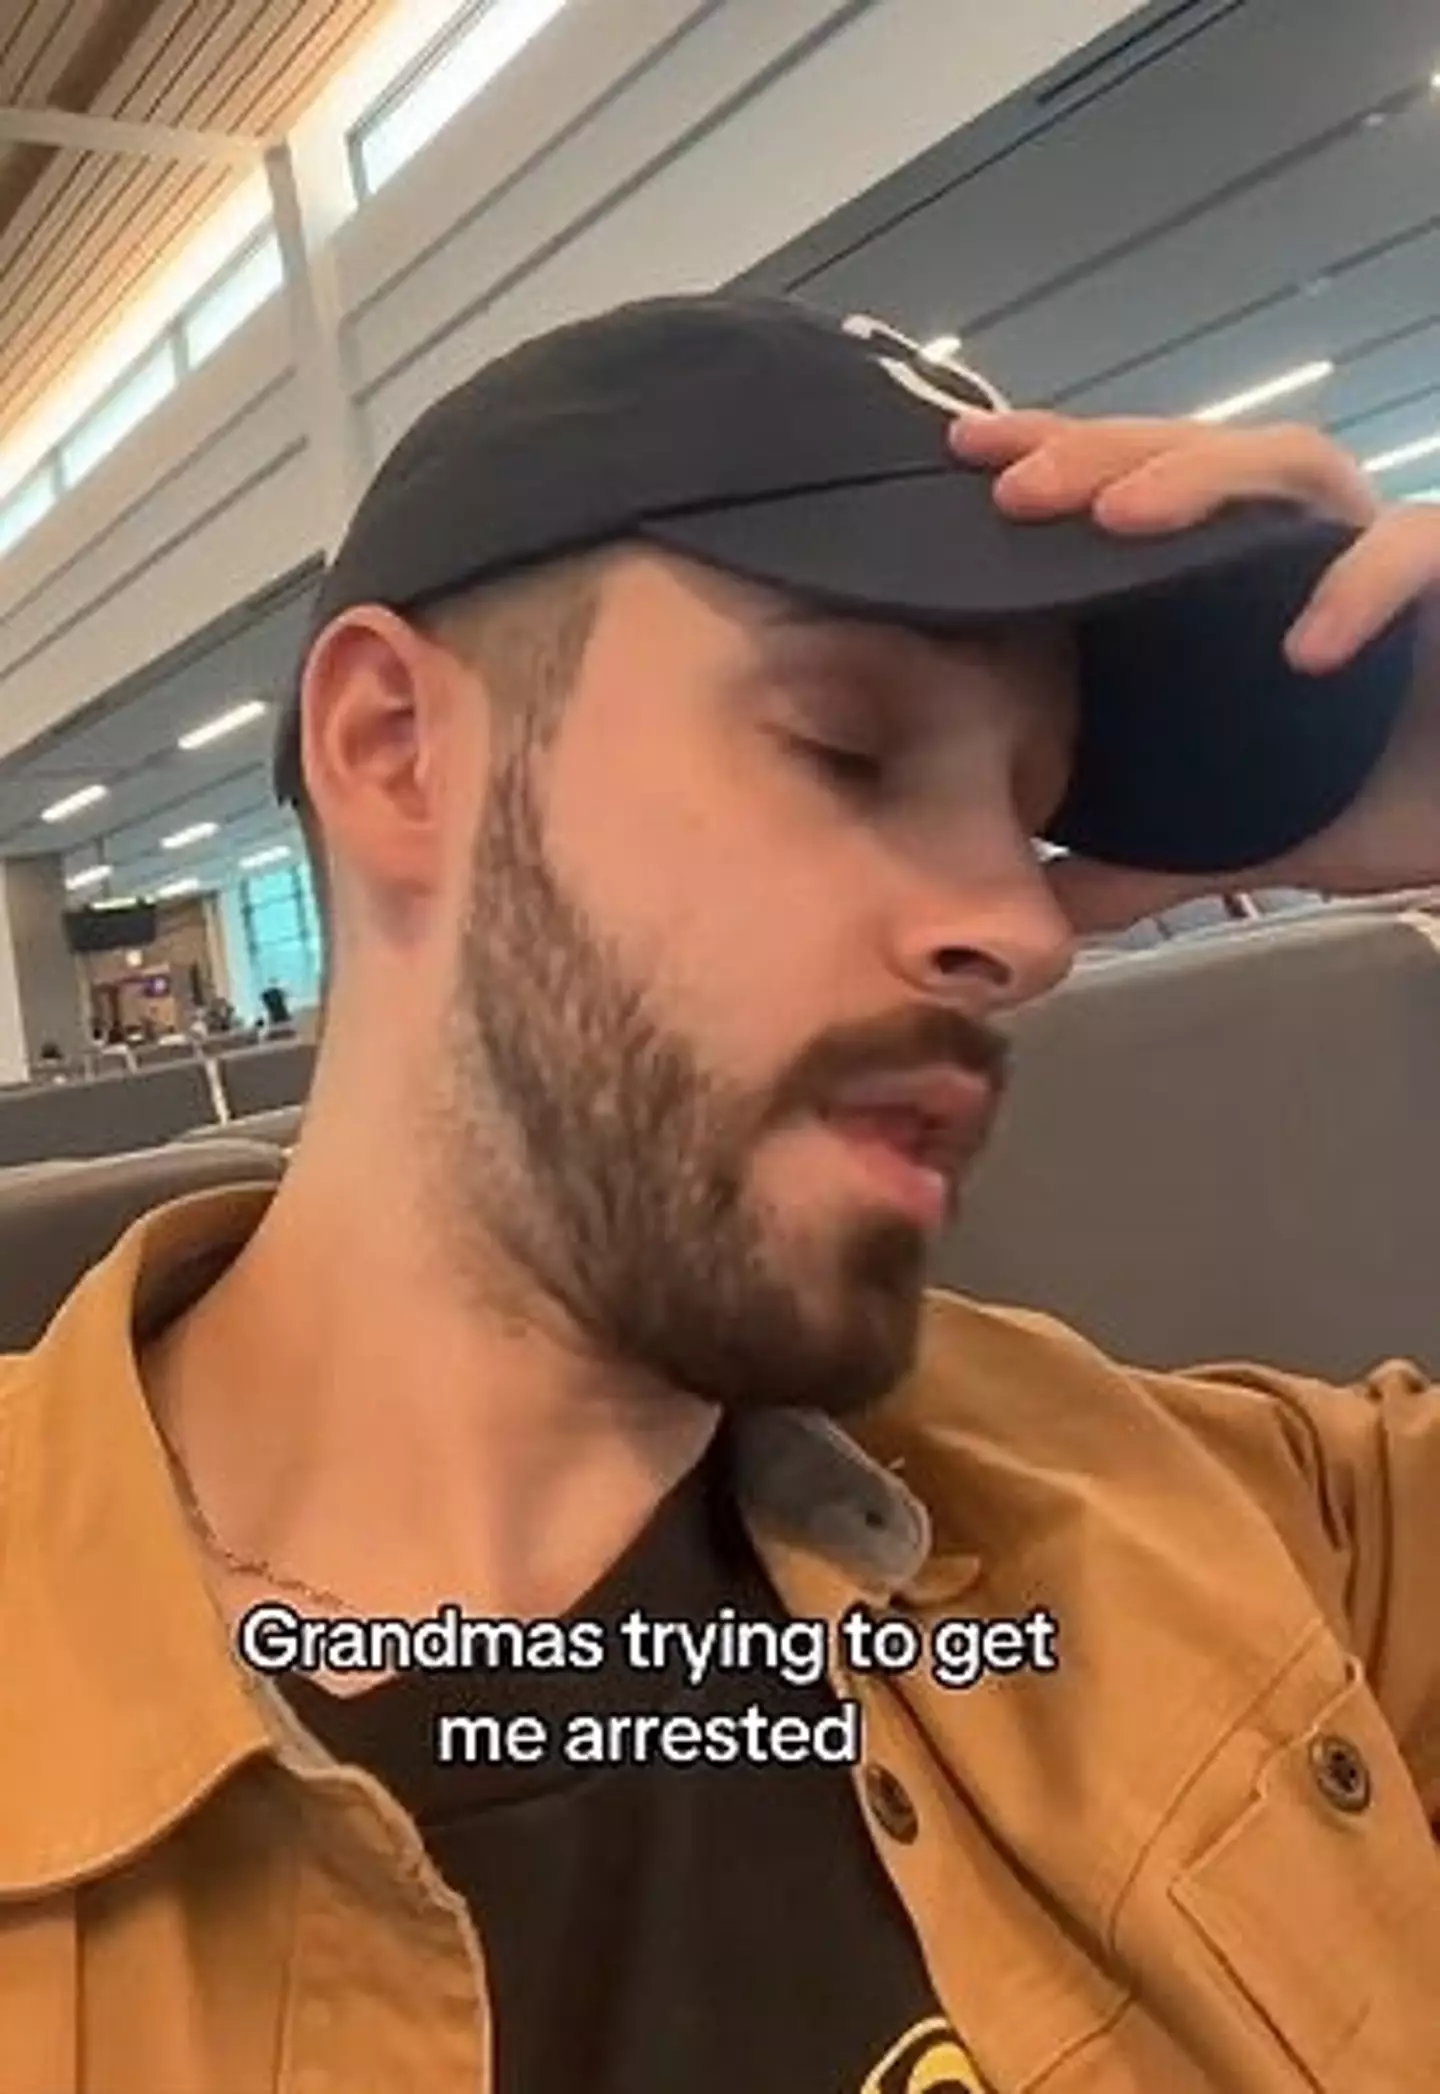 A man claims his Grandma's trying to get him 'arrested' at the airport.